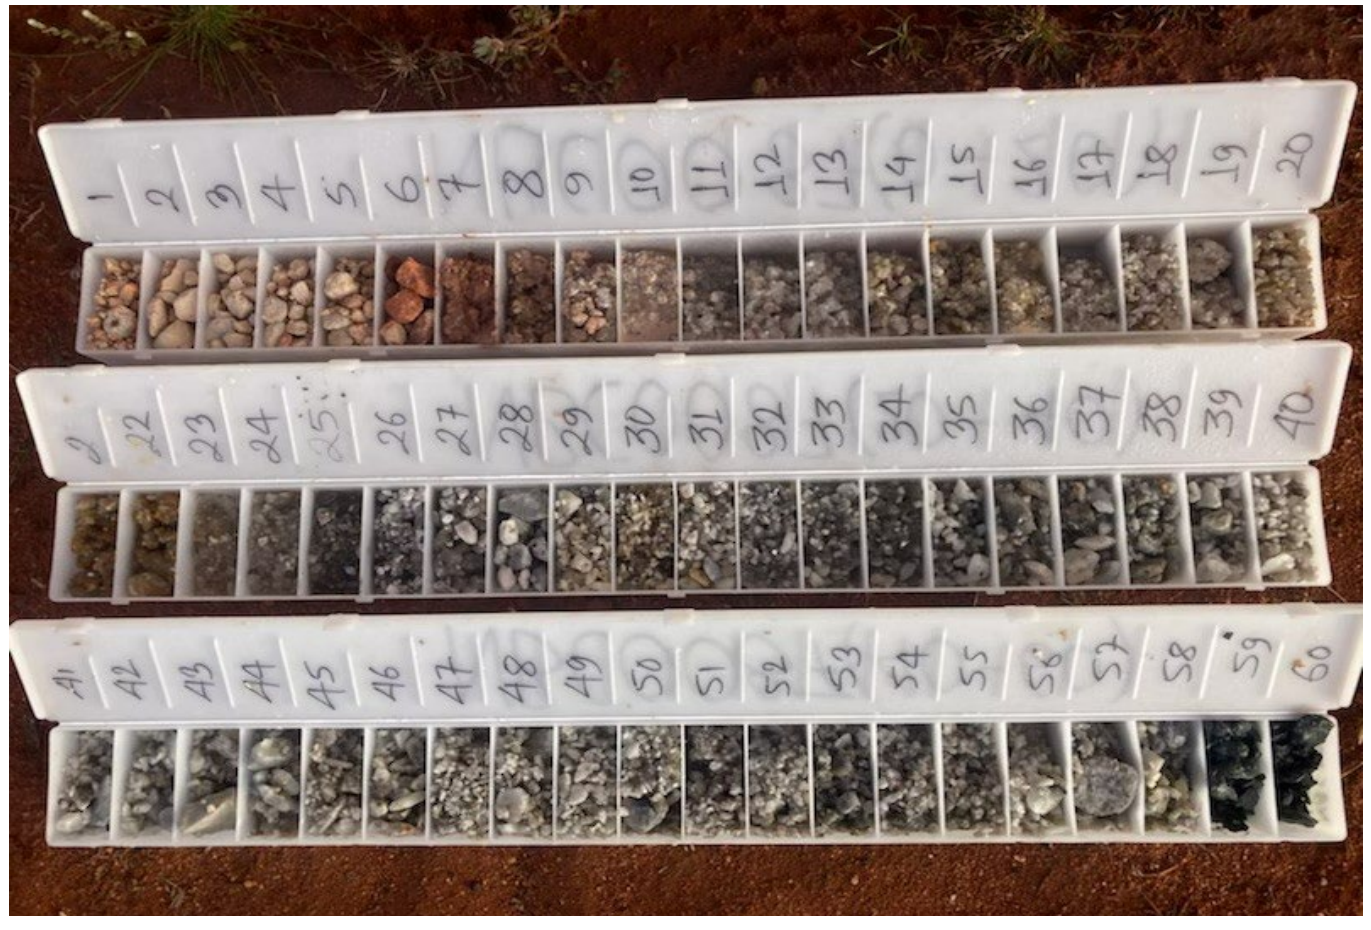 That's the stuff: a photograph of rock chip samples taken from the Phase II RC run in drillhole NBC0087